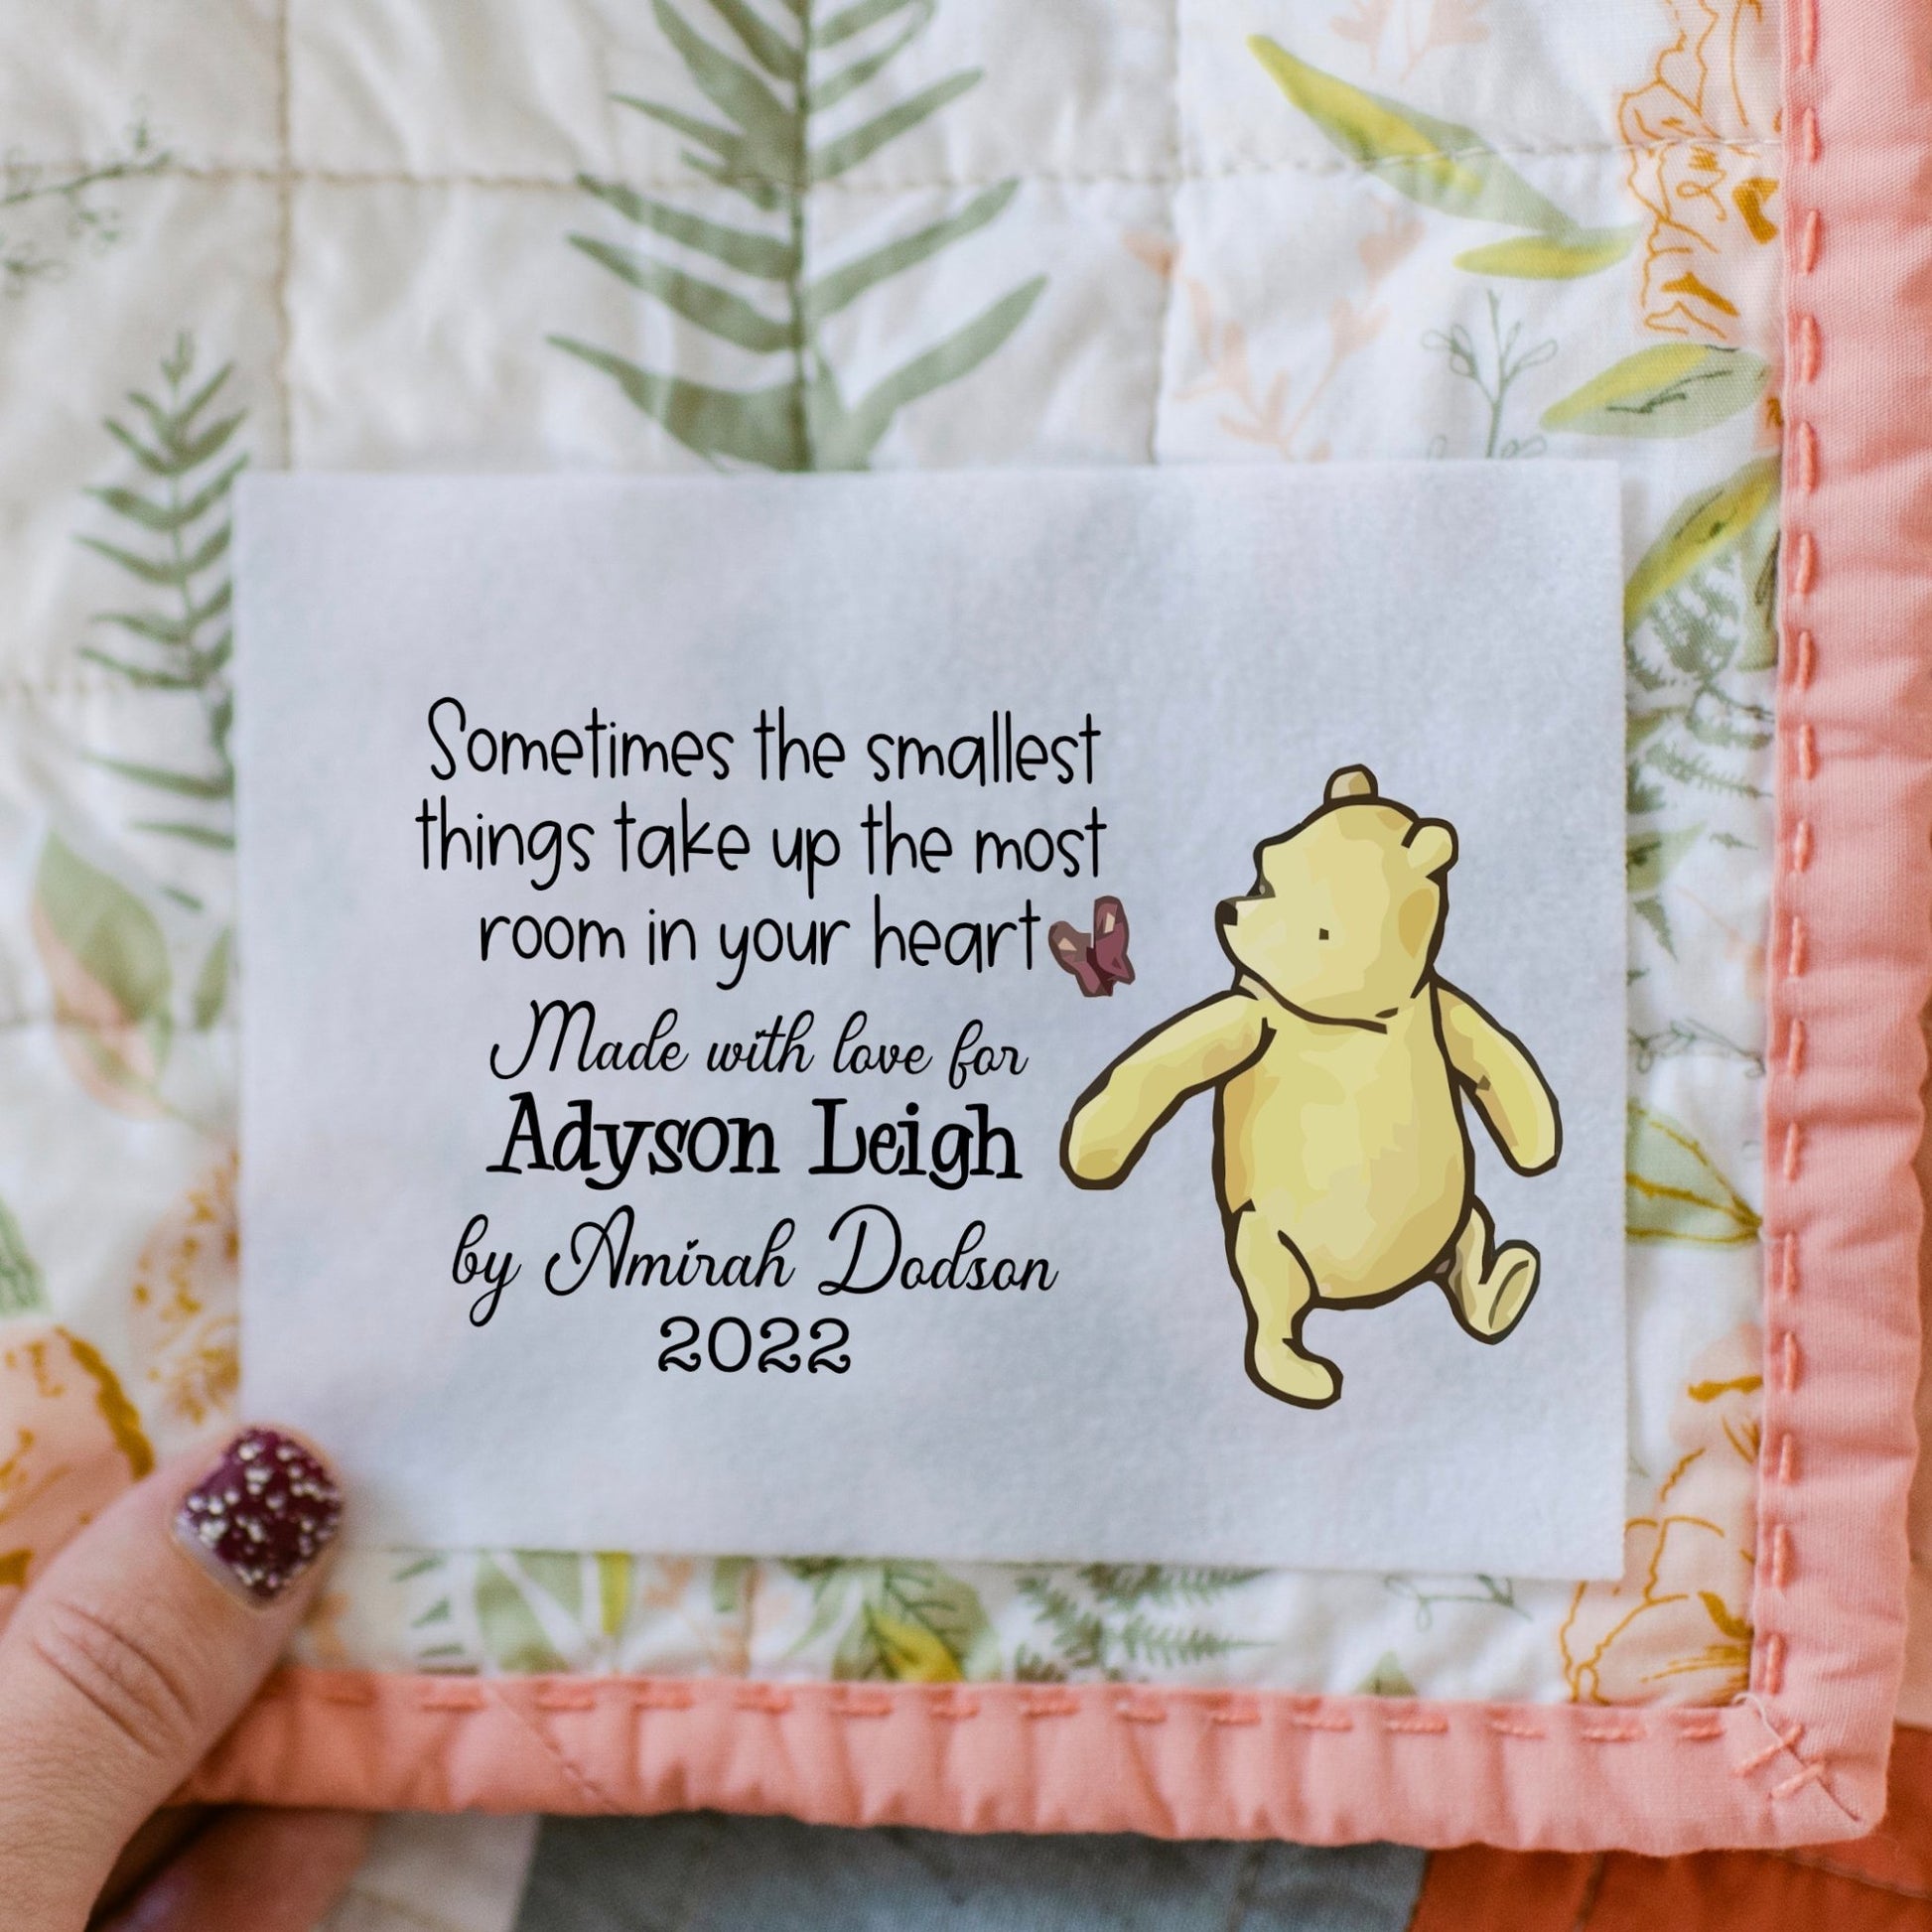 Sometimes the smallest things take up the most room in your heart. Custom baby quilt label - Jammin Threads